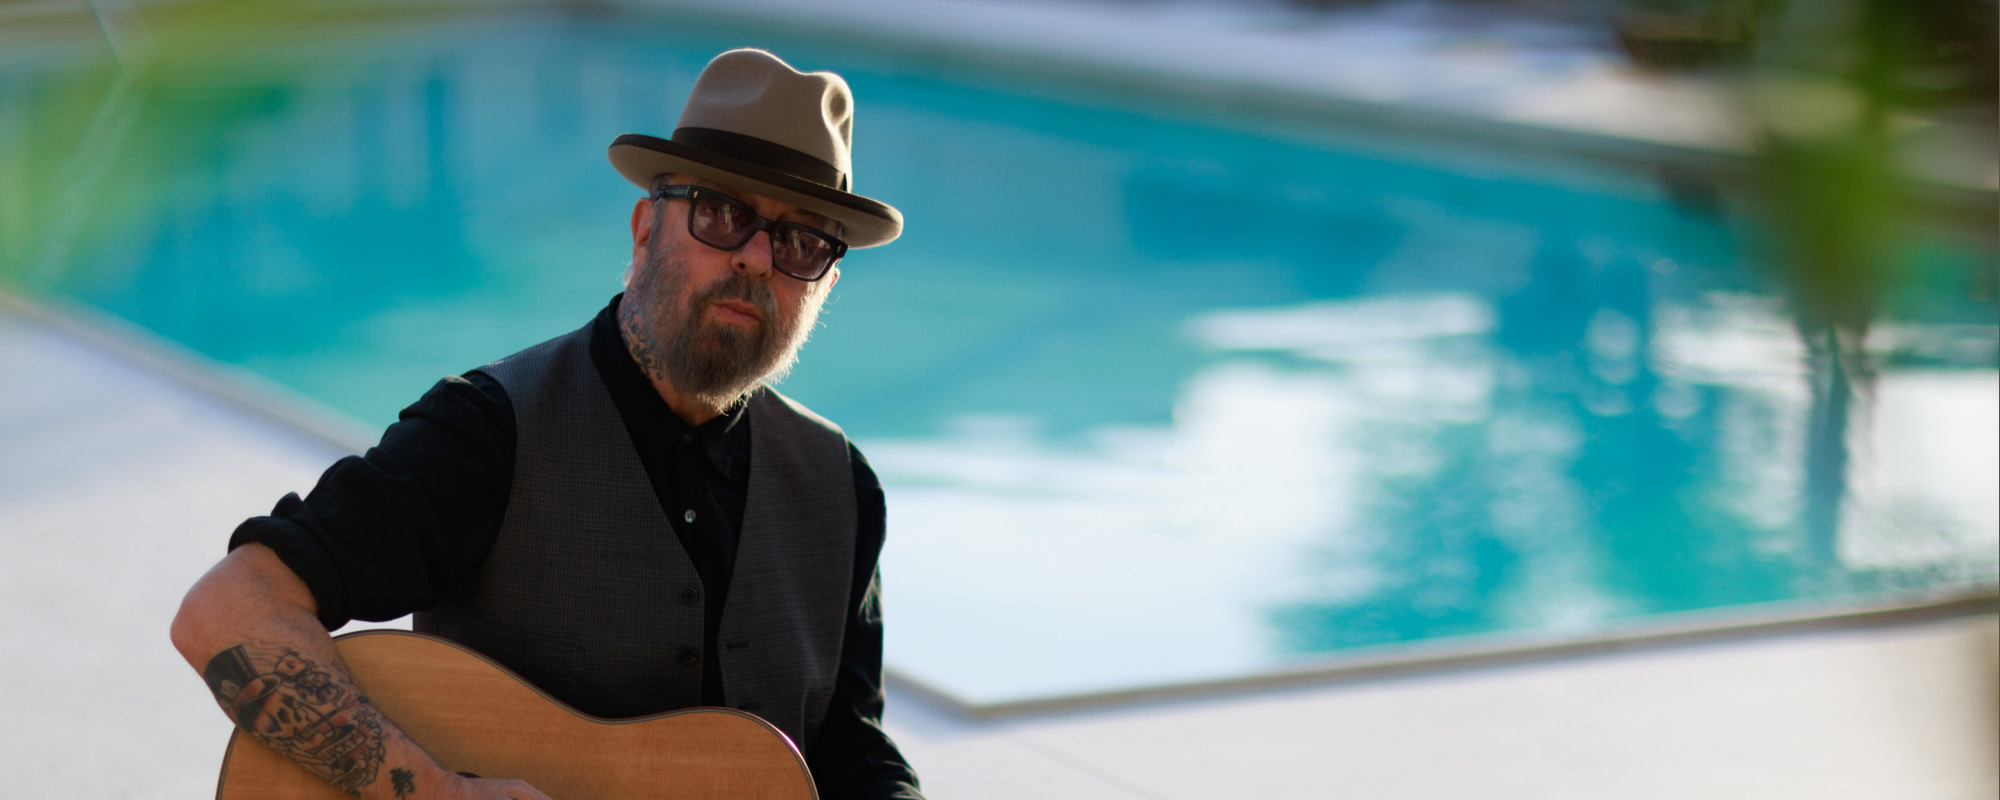 Exclusive: Eurythmics Dave Stewart’s Career Seems to be “Speeding Up Instead of Slowing Down”